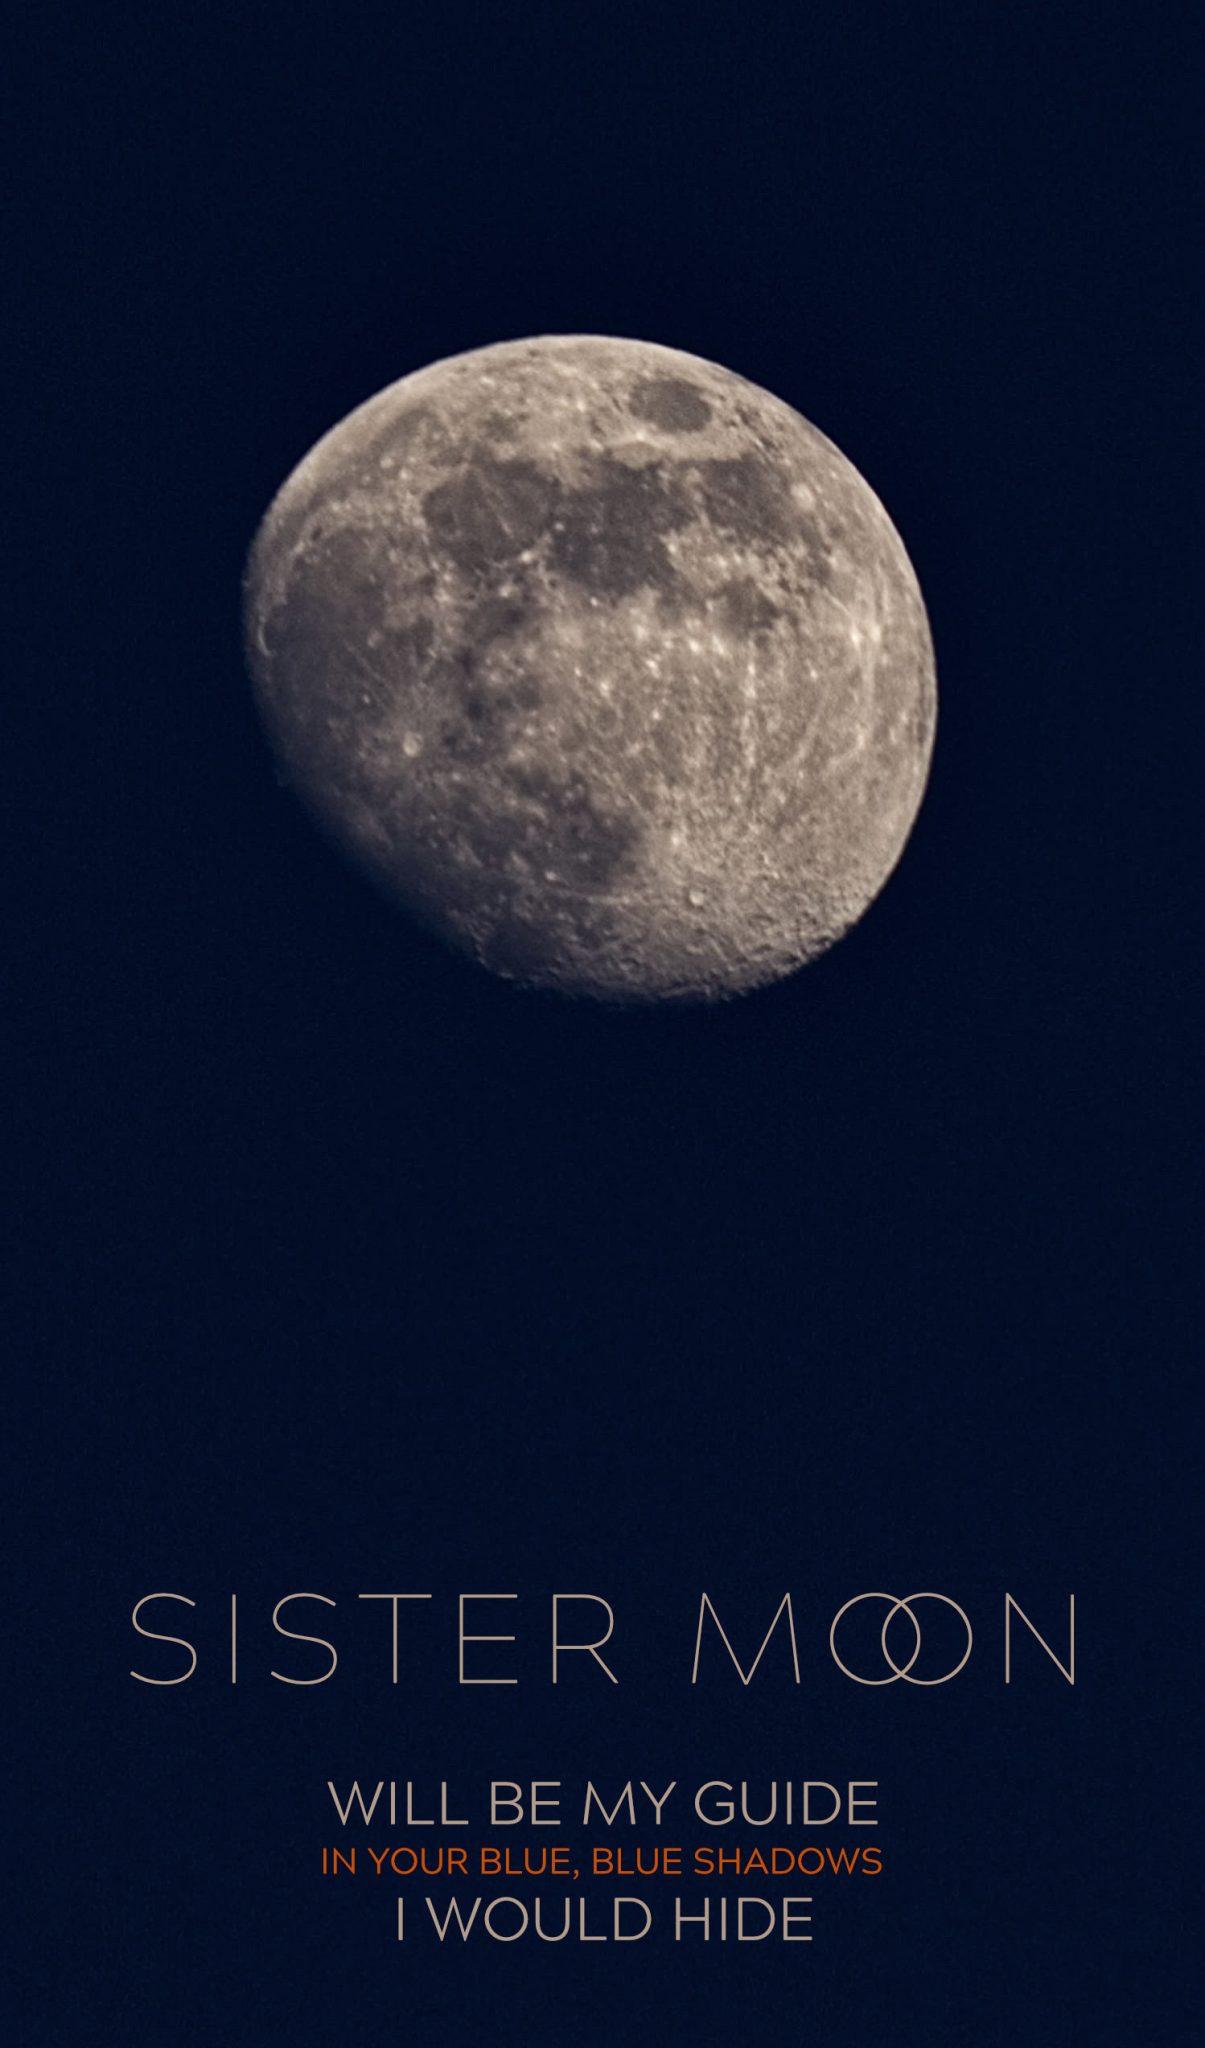 Photo of the moon on a dark blue background. Text overlaid reading: "Sister Moon will be my guide. In your blue, blue shadows, I would hide"